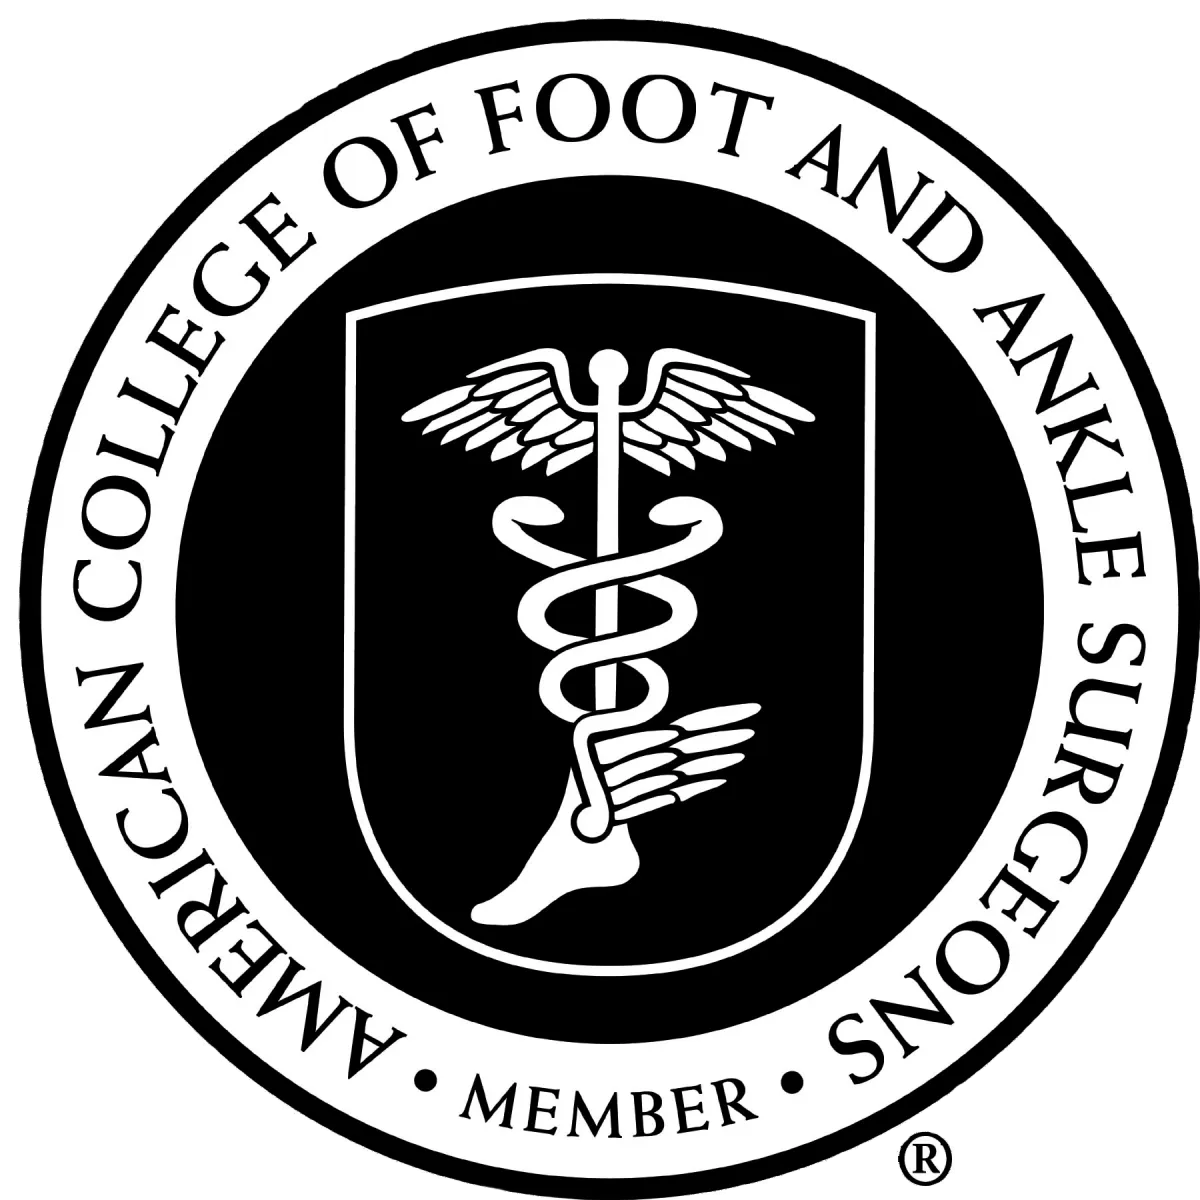 Member of American College of Foot and Ankle Surgeons 